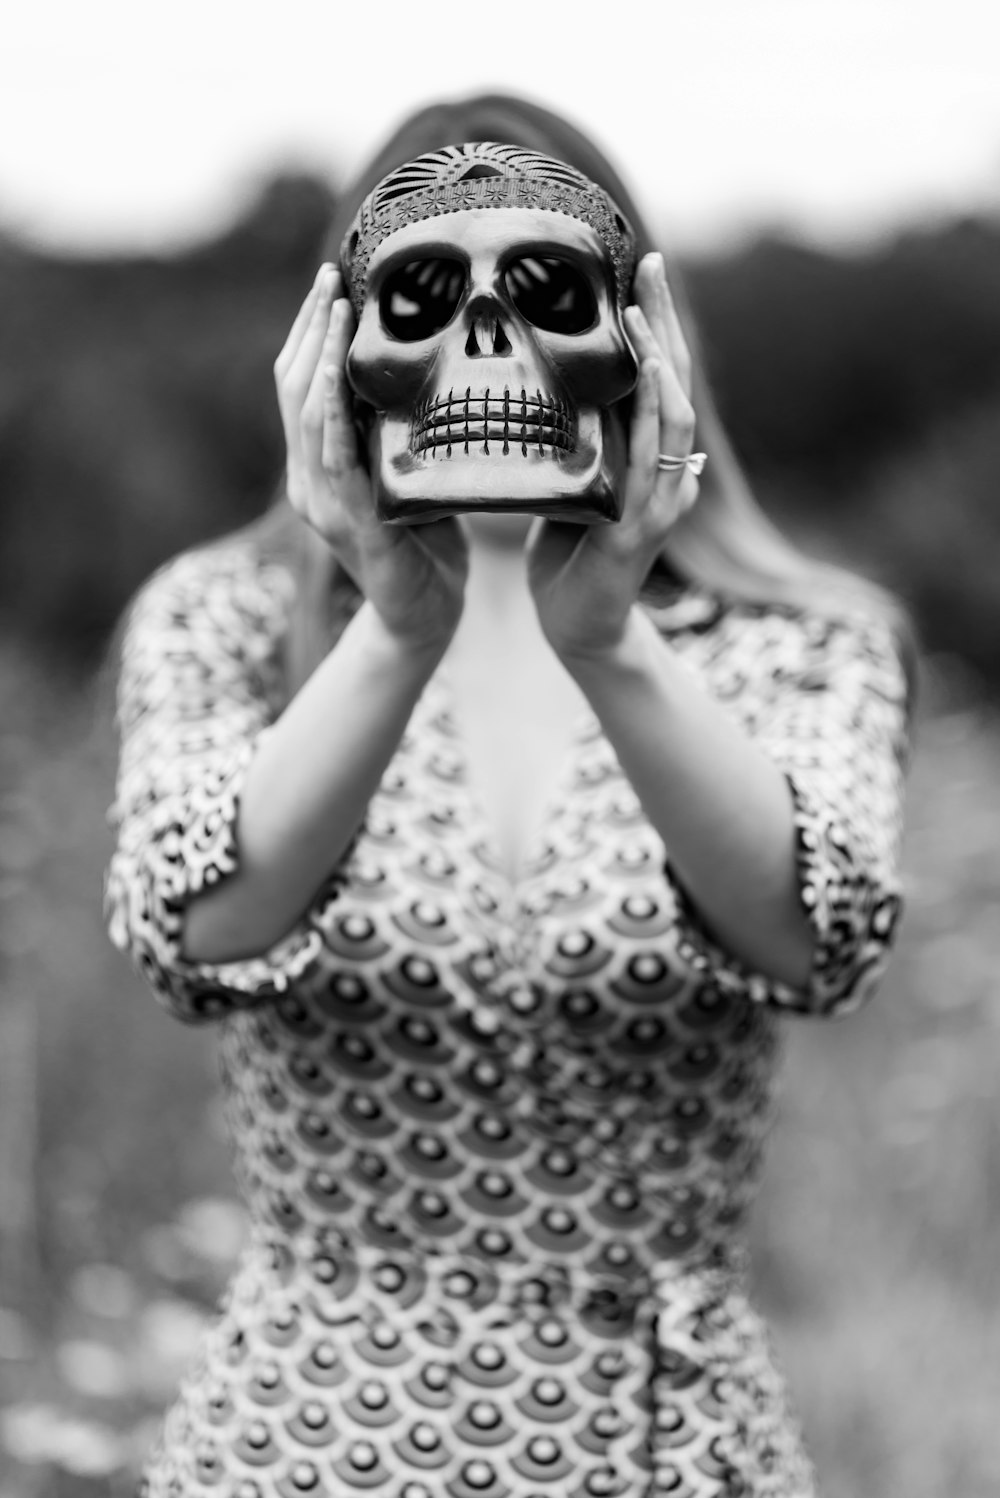 grayscale photography of woman holding skull figurine